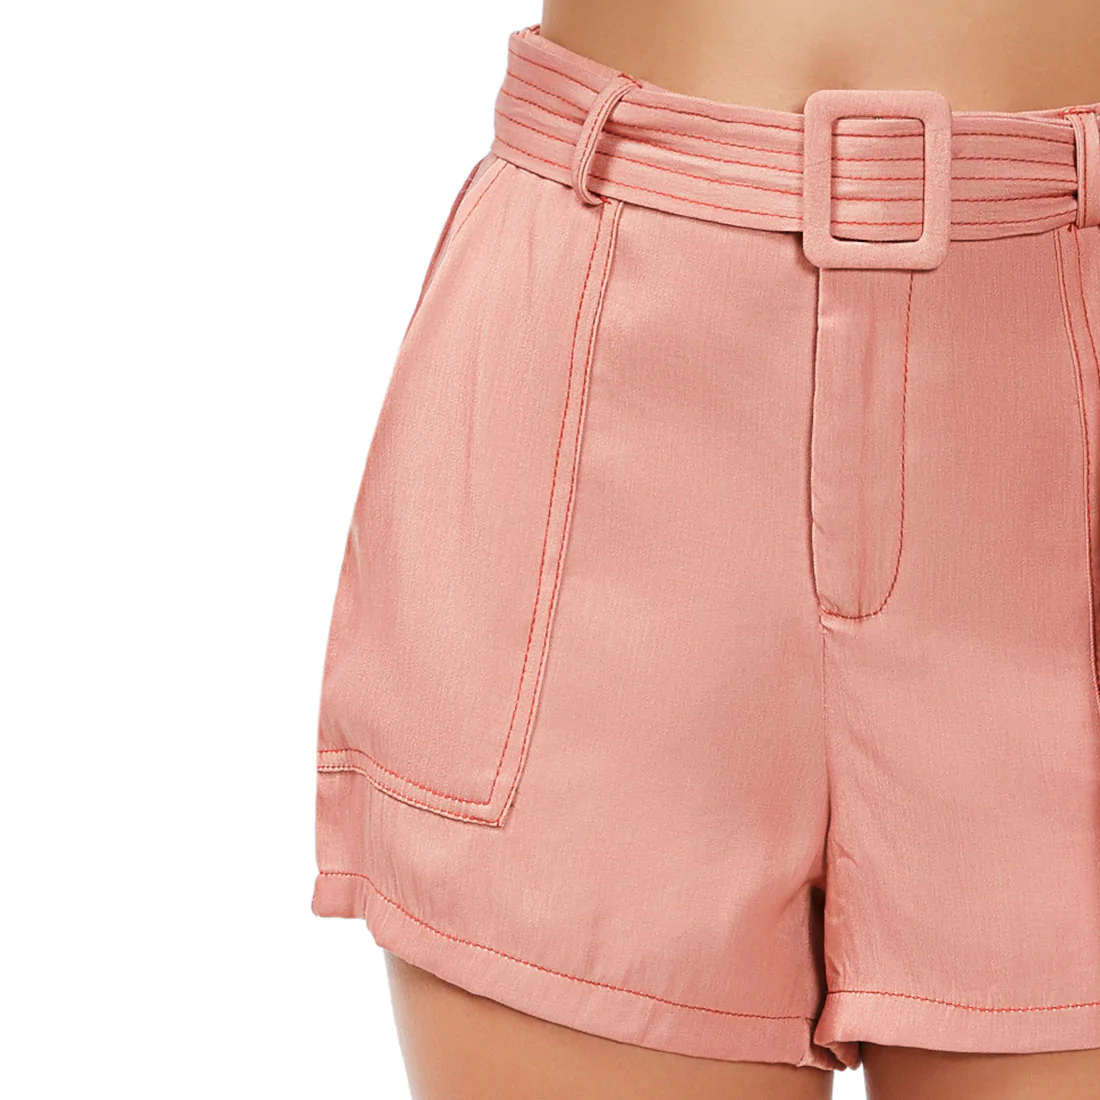 SHORTS IN CONTRAST SEAM